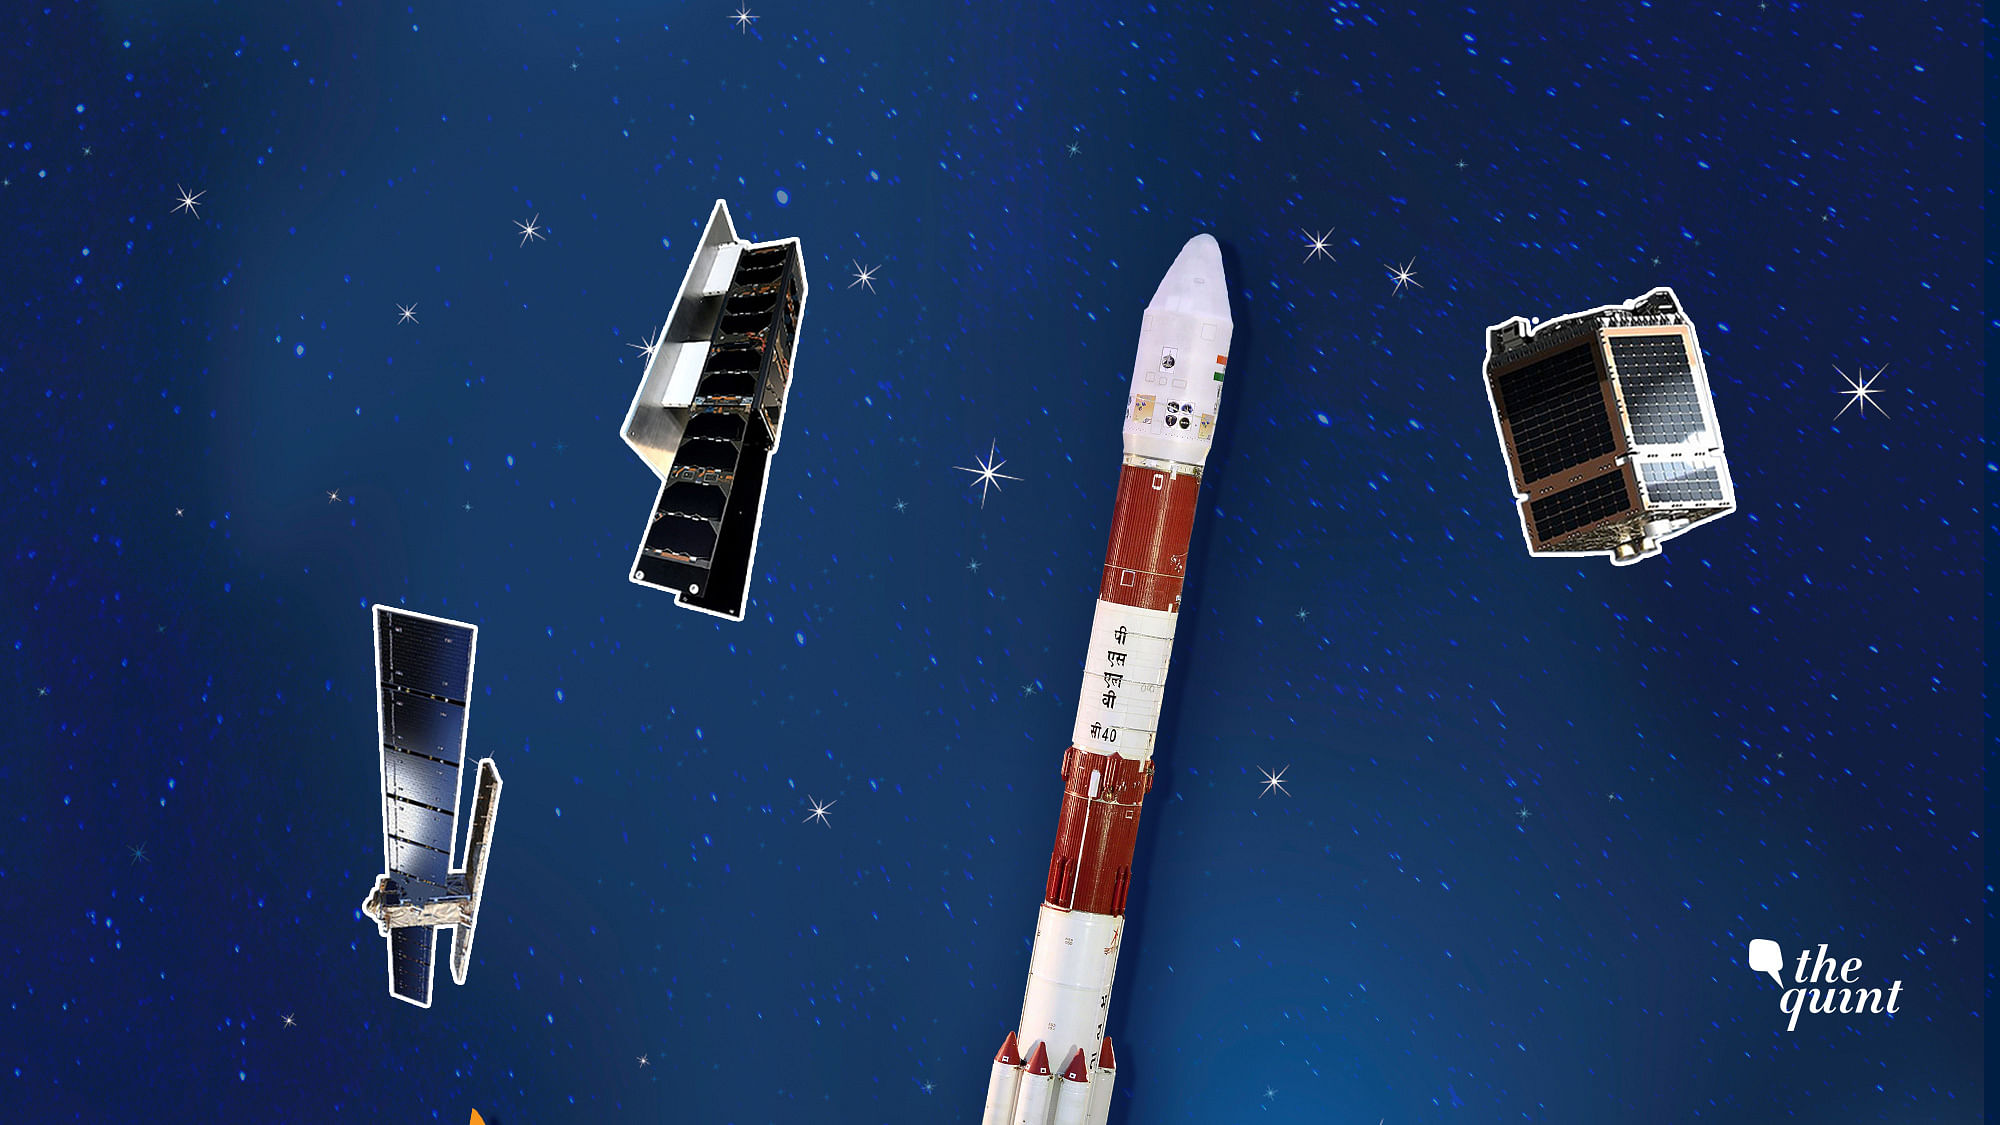 ISRO is launching its 100th satellite into space, the PSLV-C40